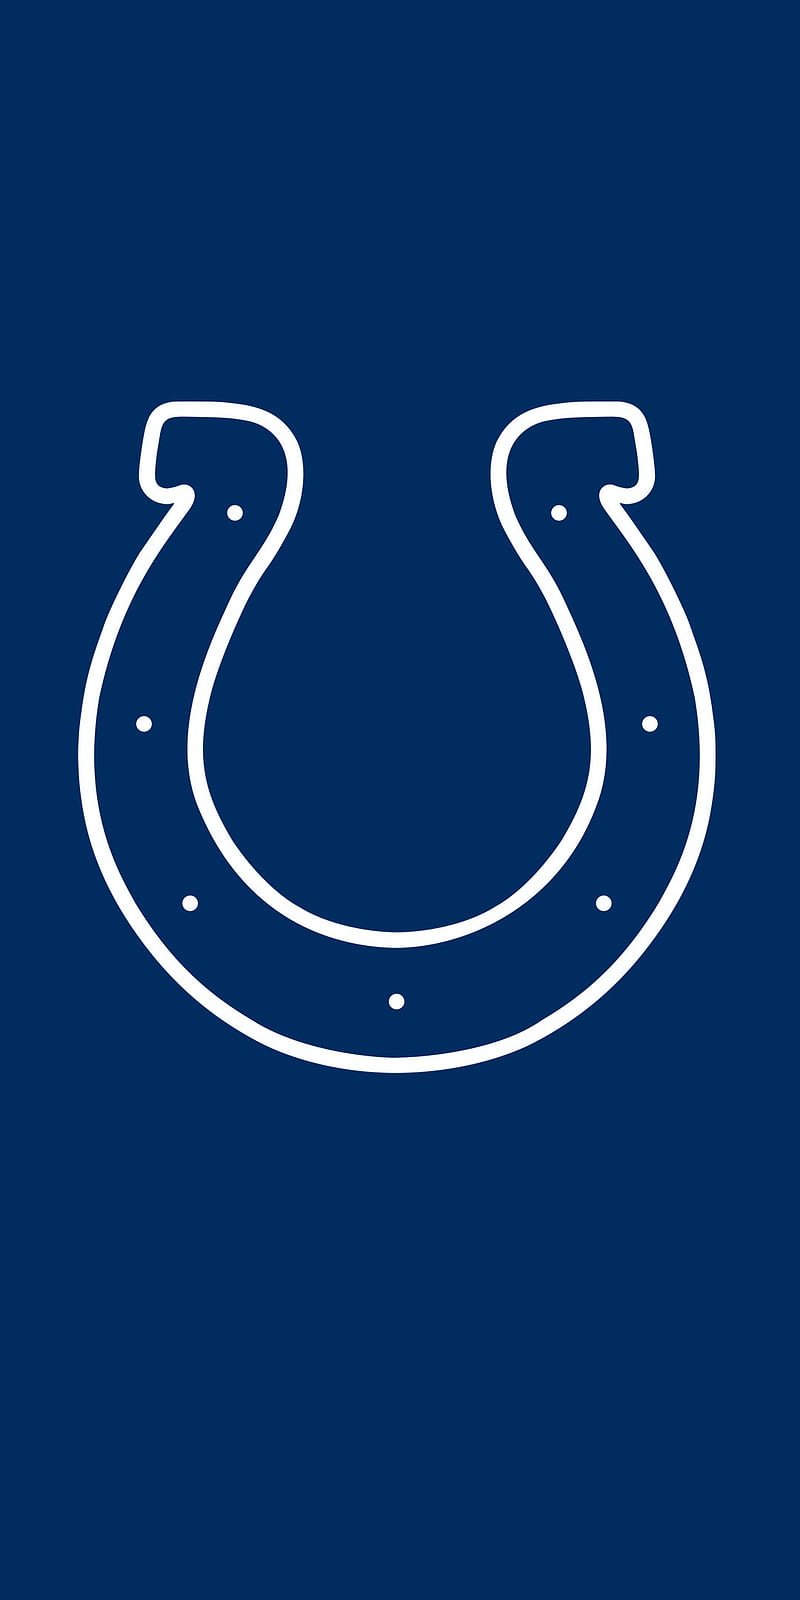 Wallpaper Indianapolis Colts iPhone  2023 NFL Football Wallpapers   Indianapolis colts logo Nfl football wallpaper Indianapolis colts